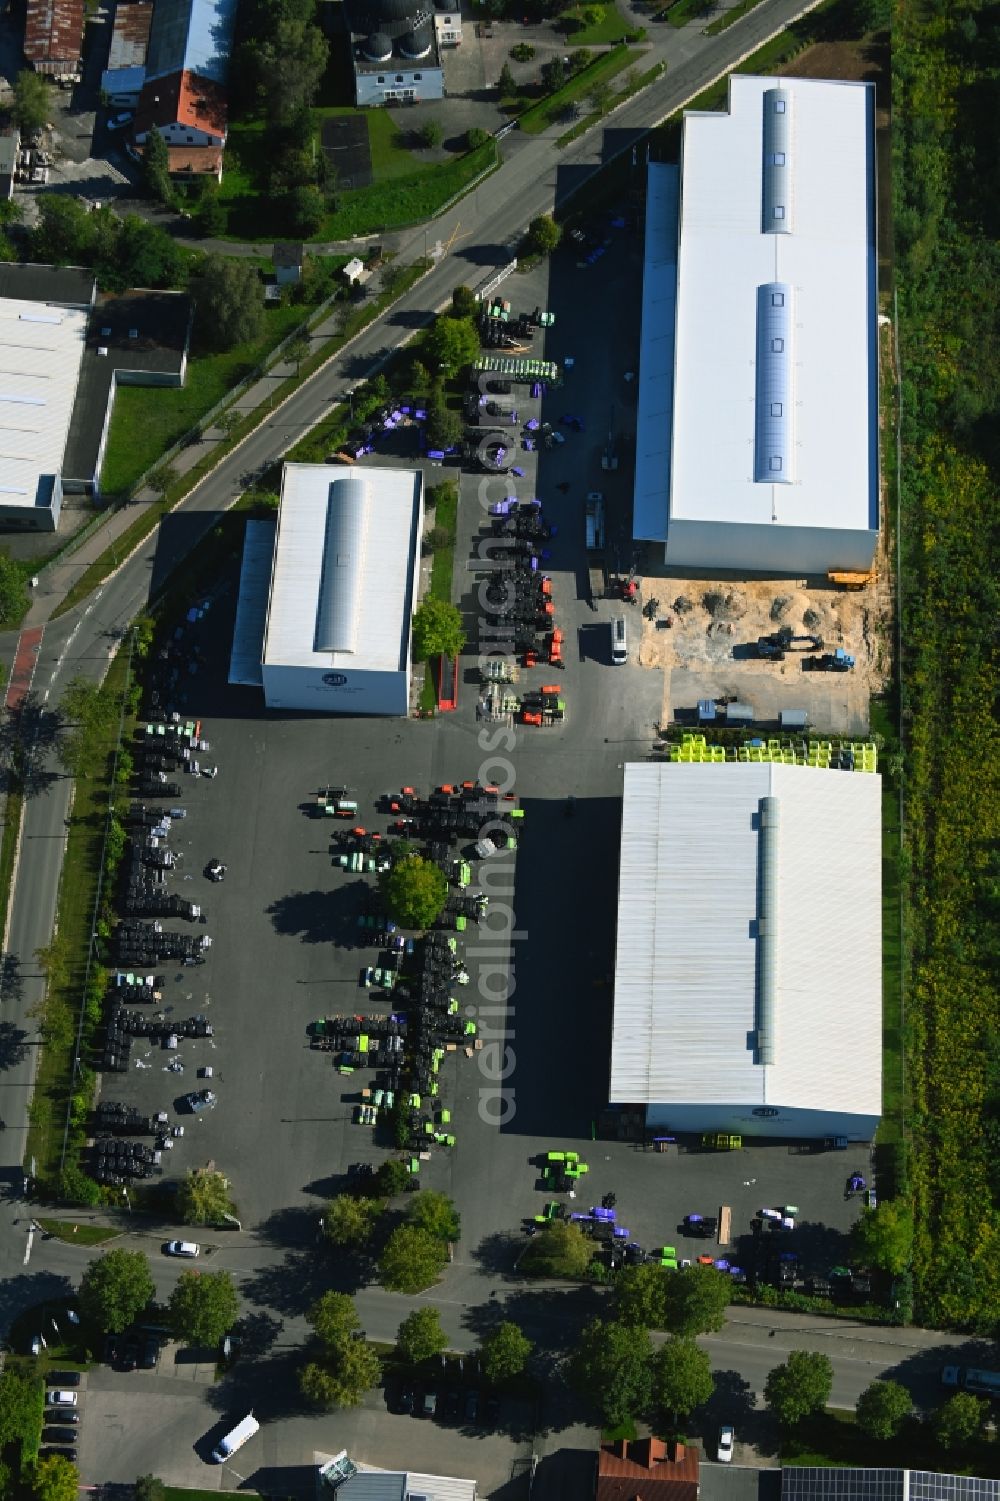 Lauingen from above - Building and production halls on the premises of Zill GmbH & Co. KG in Lauingen in the state Bavaria, Germany